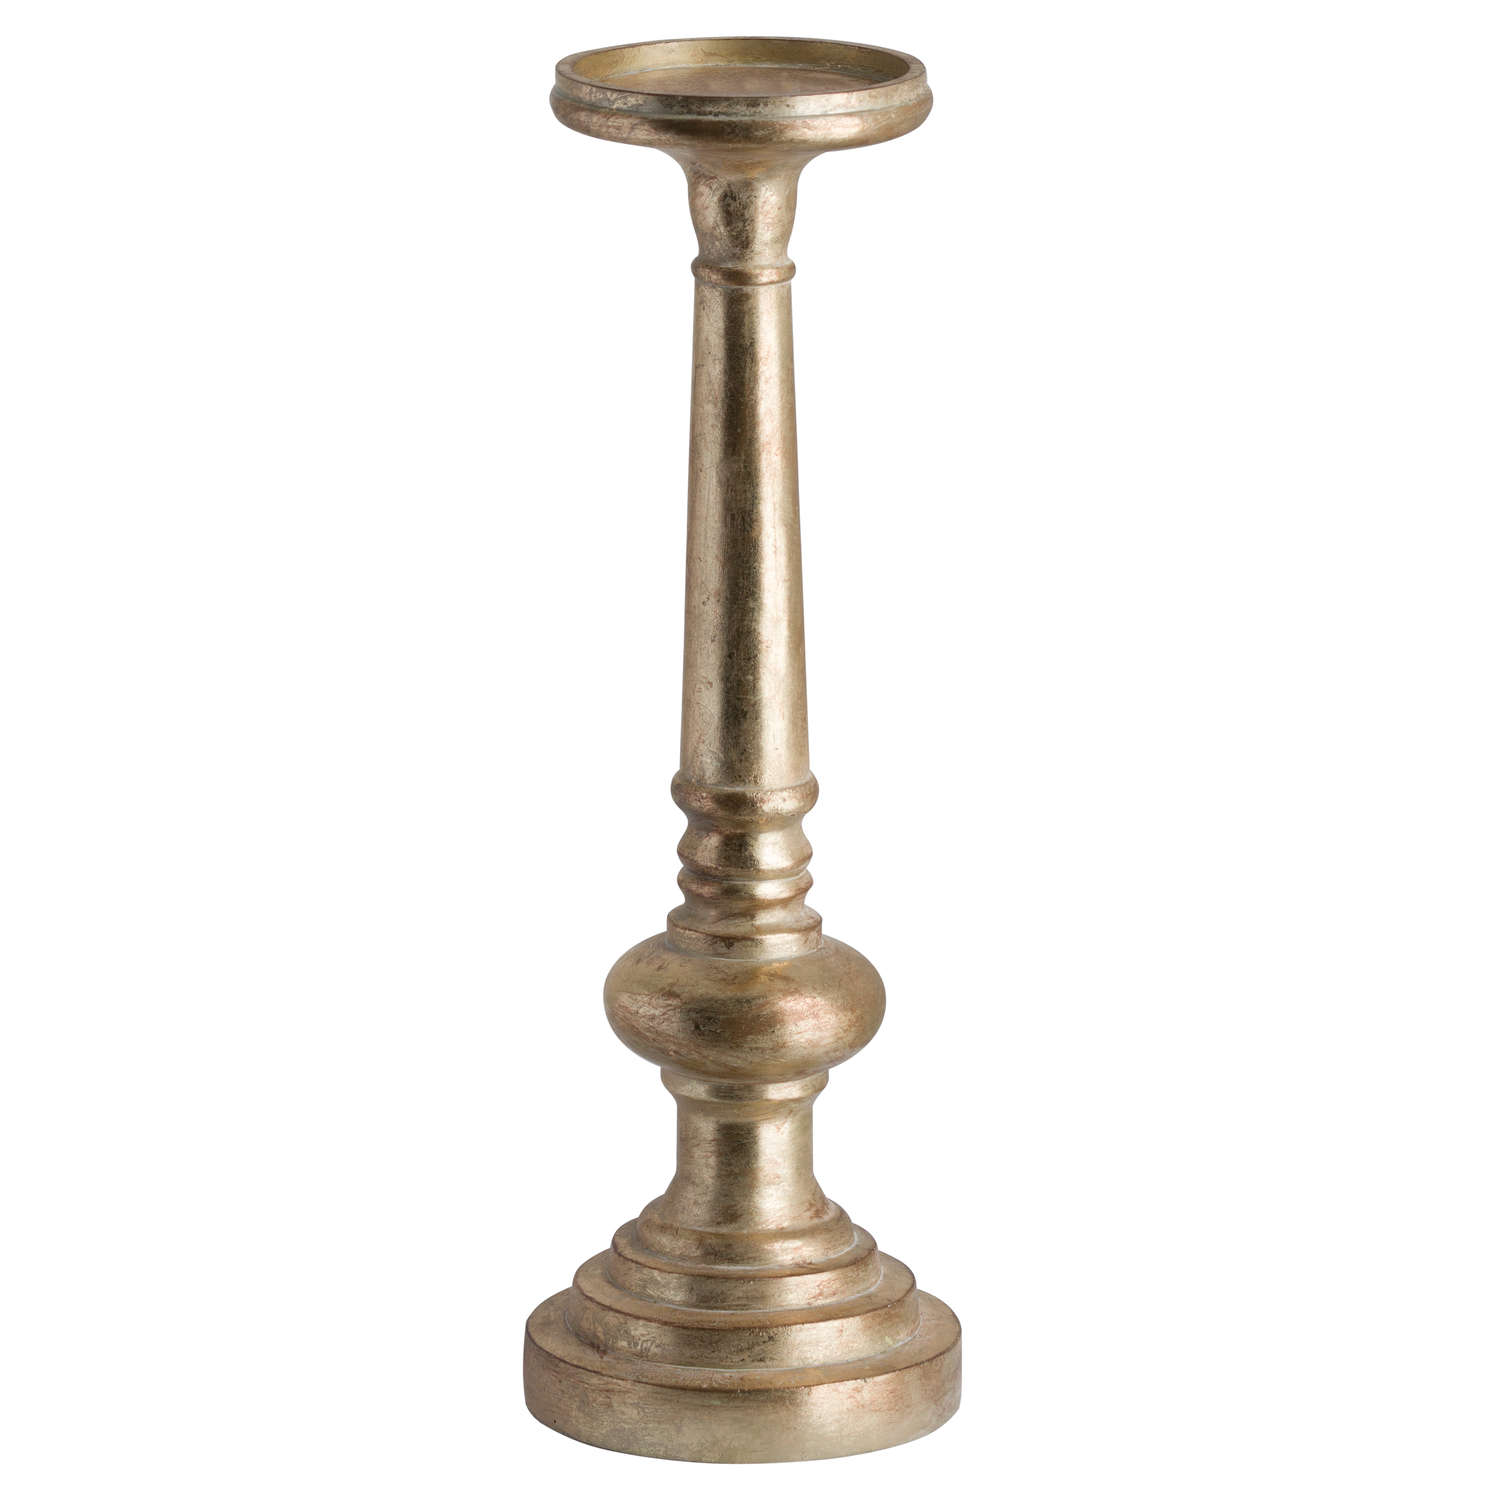 Antique Brass Effect Tall Candle Holder